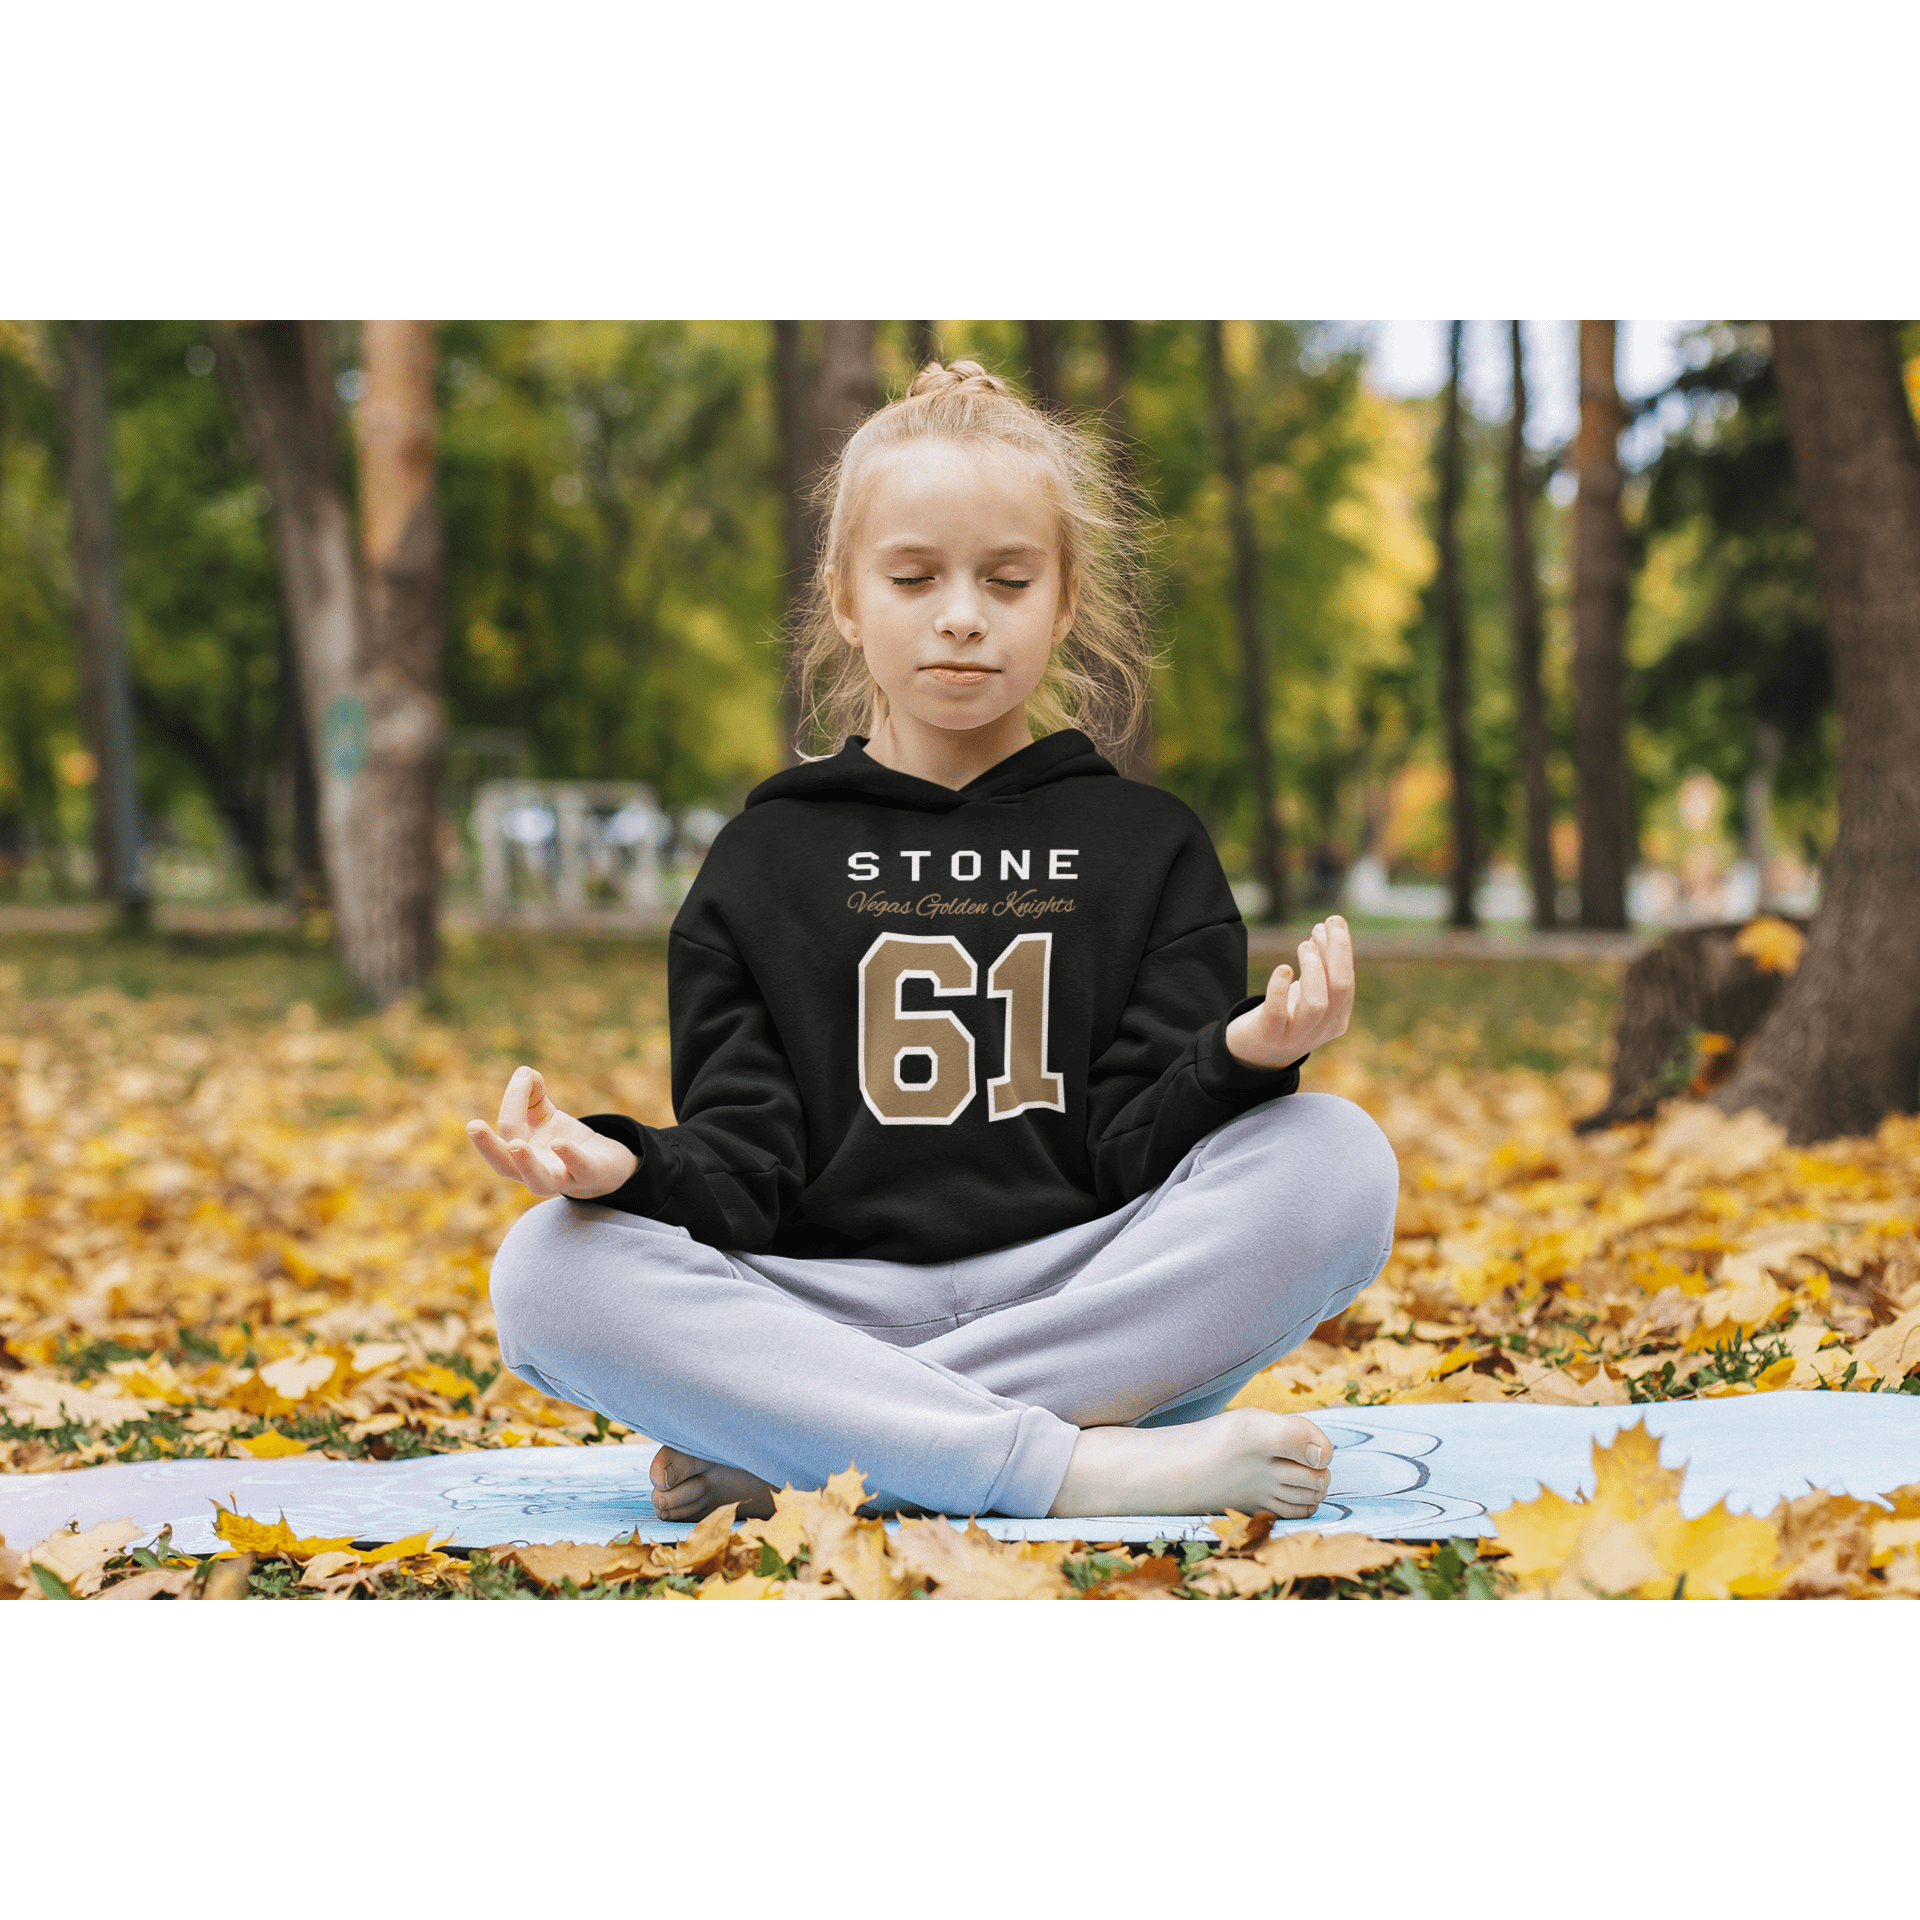 Kids clothes Stone 61 Vegas Golden Knights Youth Hooded Sweatshirt